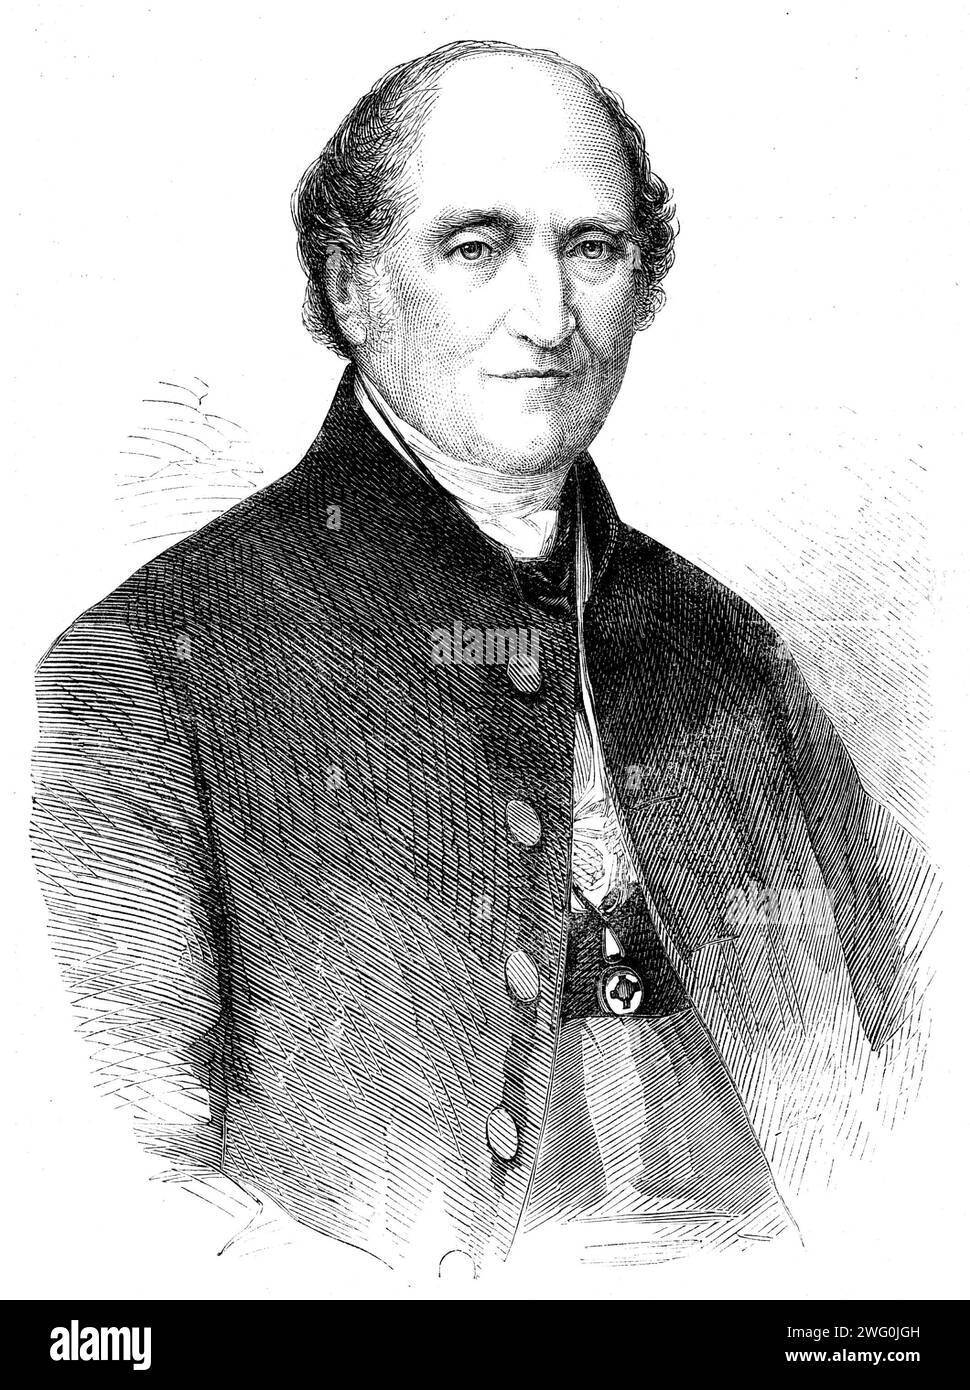 The late Archbishop of Armagh, 1862. Engraving from a photograph by Mayall, of '...the Right Hon. and Most Rev. Lord John George Beresford, D.D., P.C., Archbishop of Armagh and Bishop of Clogher, Primate of All Ireland and Metropolitan, Primate of the Order of St. Patrick, Lord Almoner to the Queen, and Chancellor of Trinity College, Dublin. The Archbishop was never married'. From &quot;Illustrated London News&quot;, 1862. Stock Photo